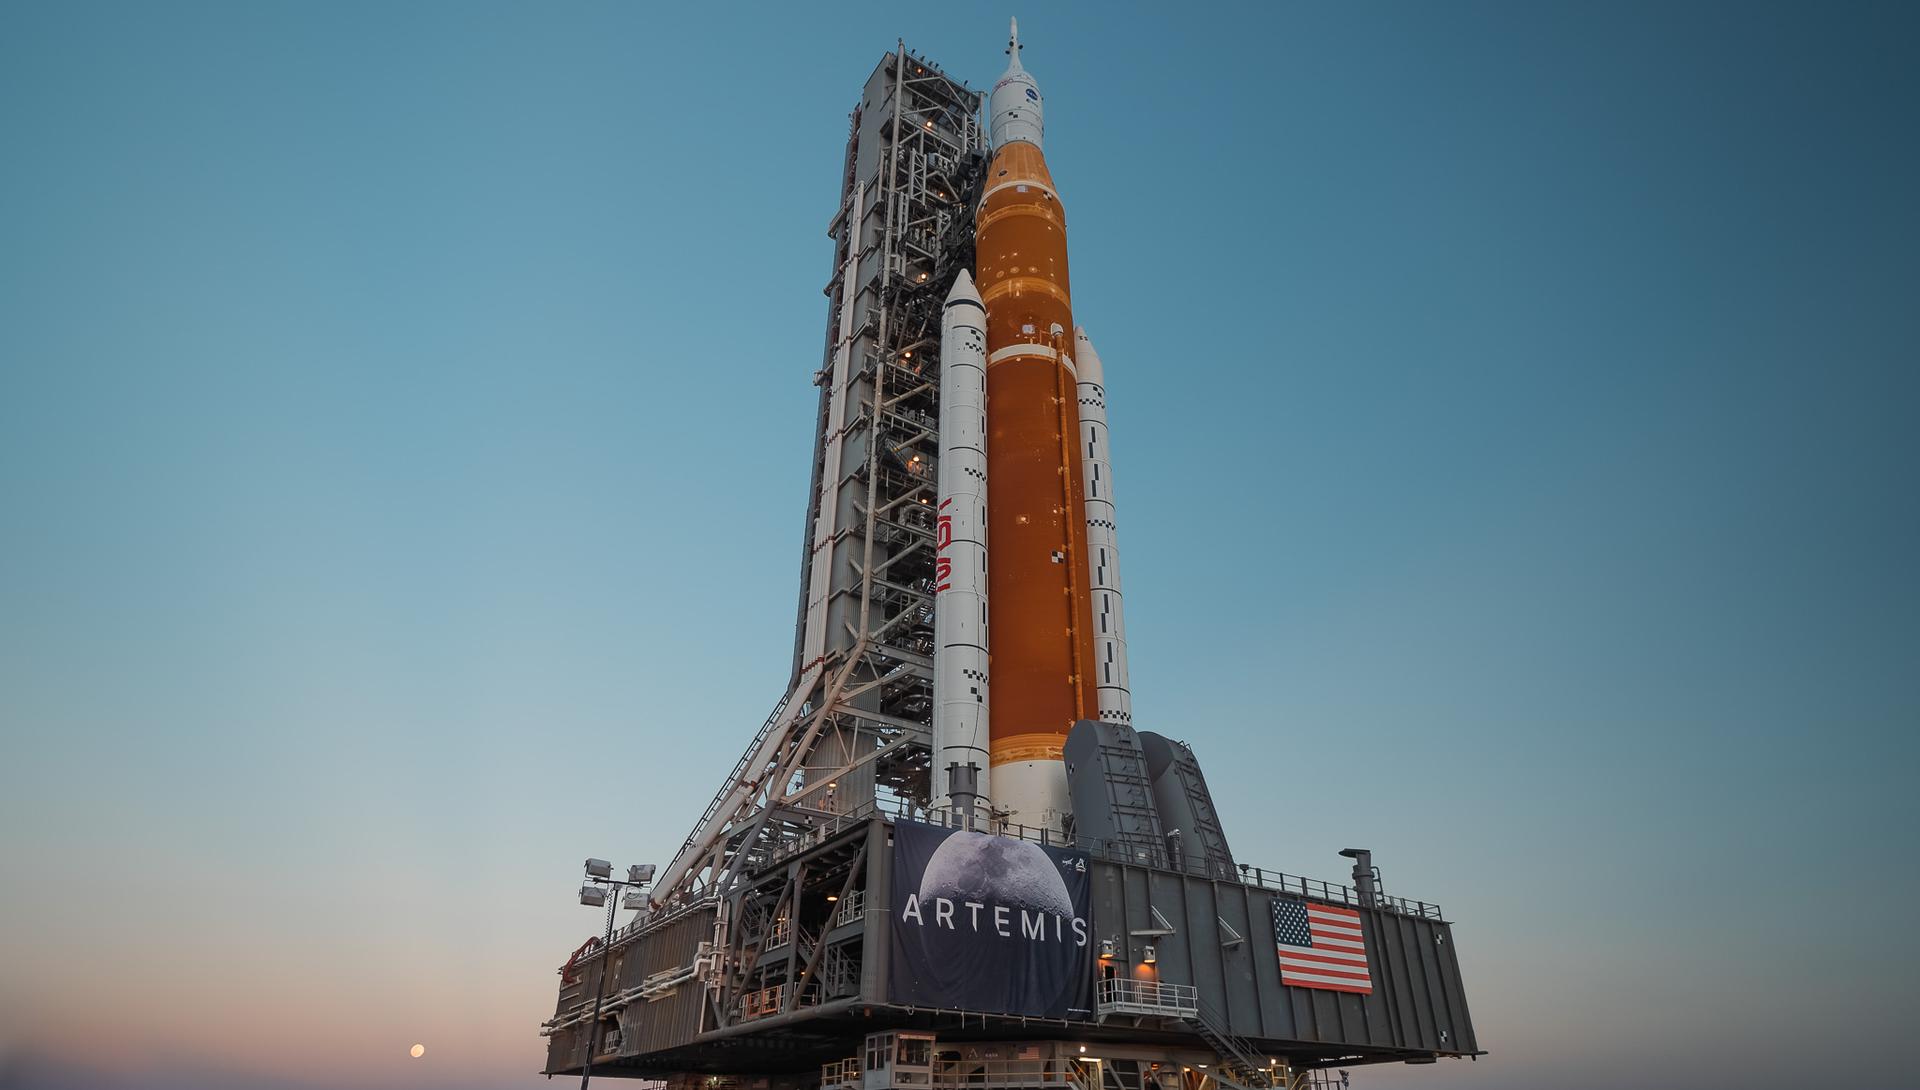 World's most powerful rocket SLS to return to launchpad for wet dress rehearsal, says NASA